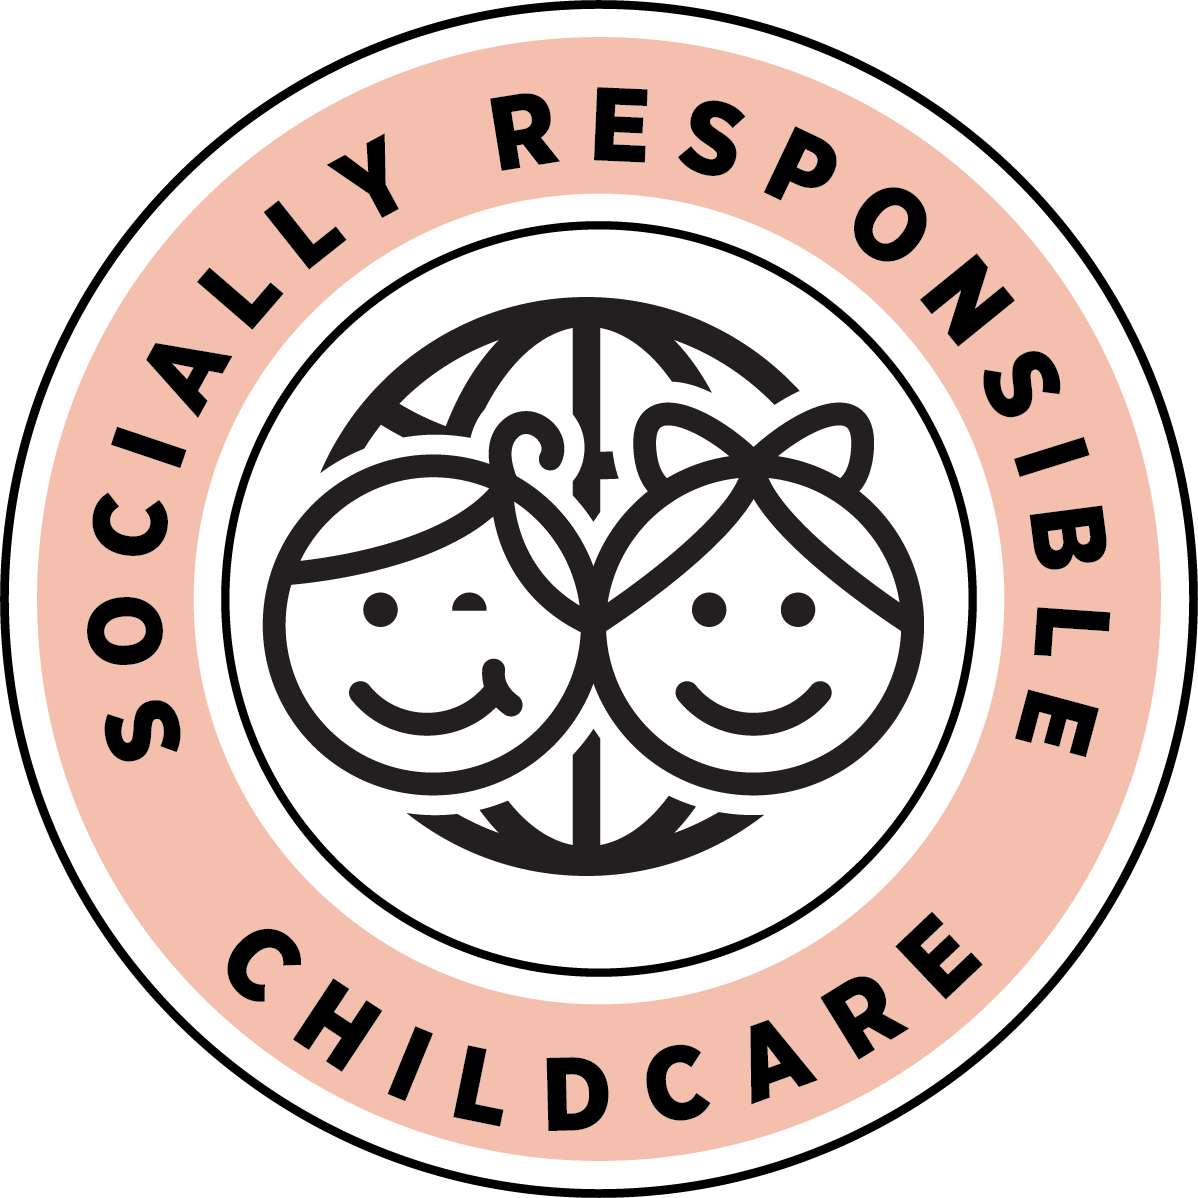 casa franchise sticker saying "socially responsible child care" part of out giving back initiative drives.